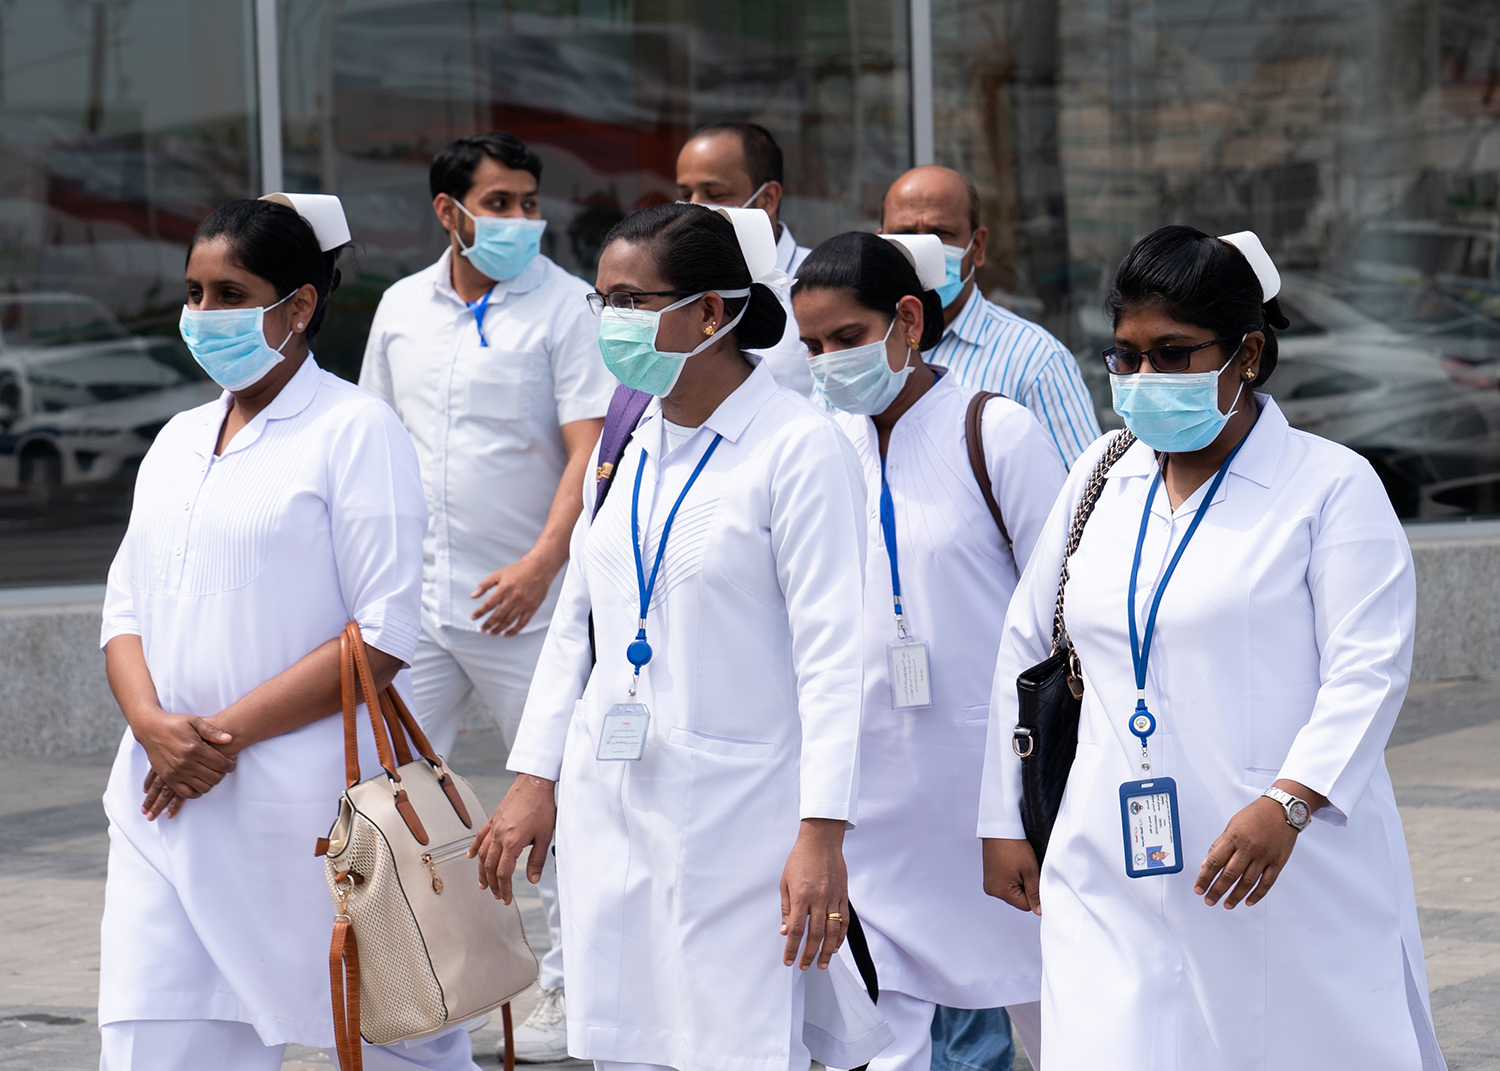 Nurses from Kerala are engaged in the UK’s fight against COVID